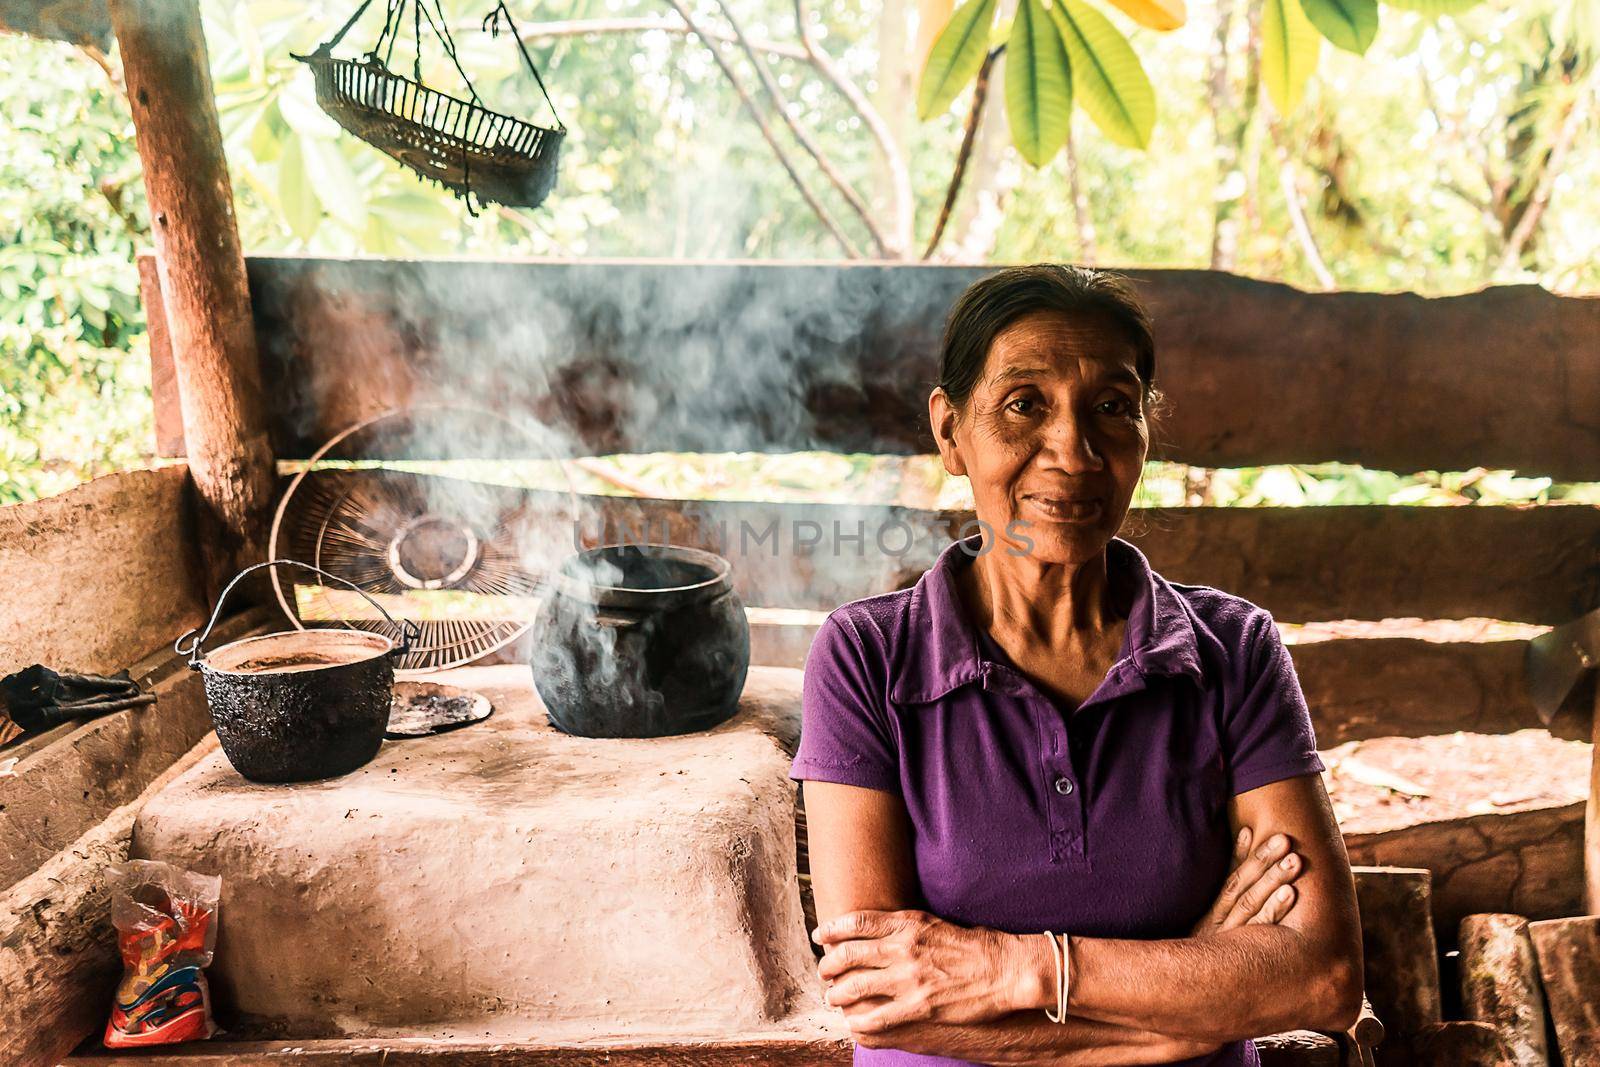 Latin grandmother with crossed arms smiling at camera in the kitchen of her house by cfalvarez